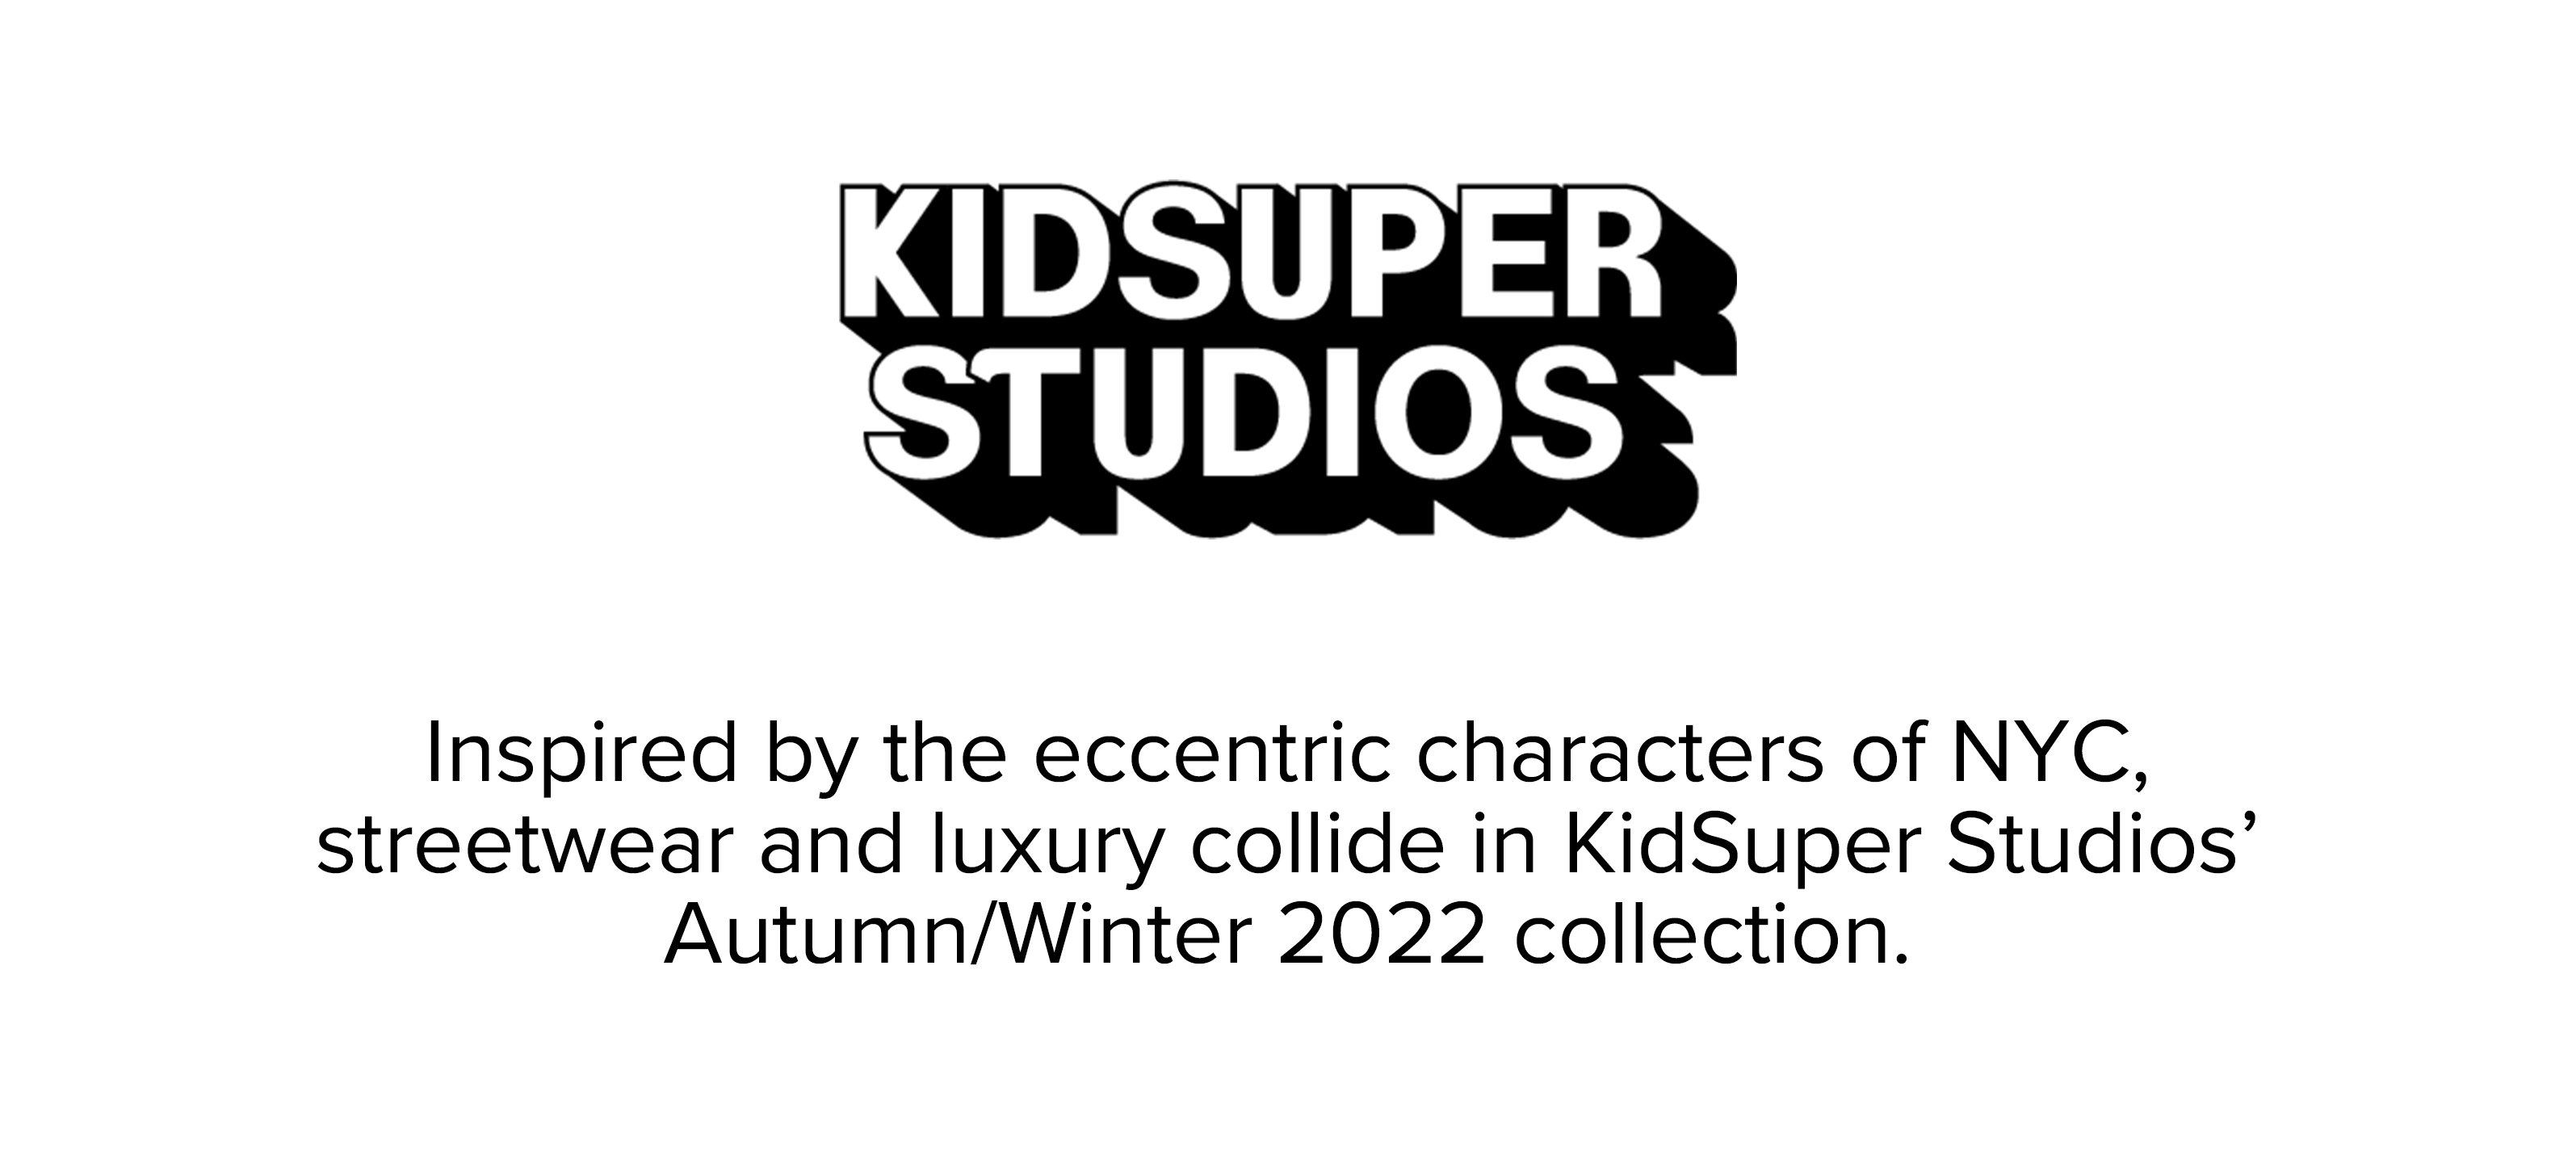  KIDSUPER S 0 Inspired by the eccentric characters of NYC, streetwear and luxury collide in KidSuper Studios AutumnWinter 2022 collection. 